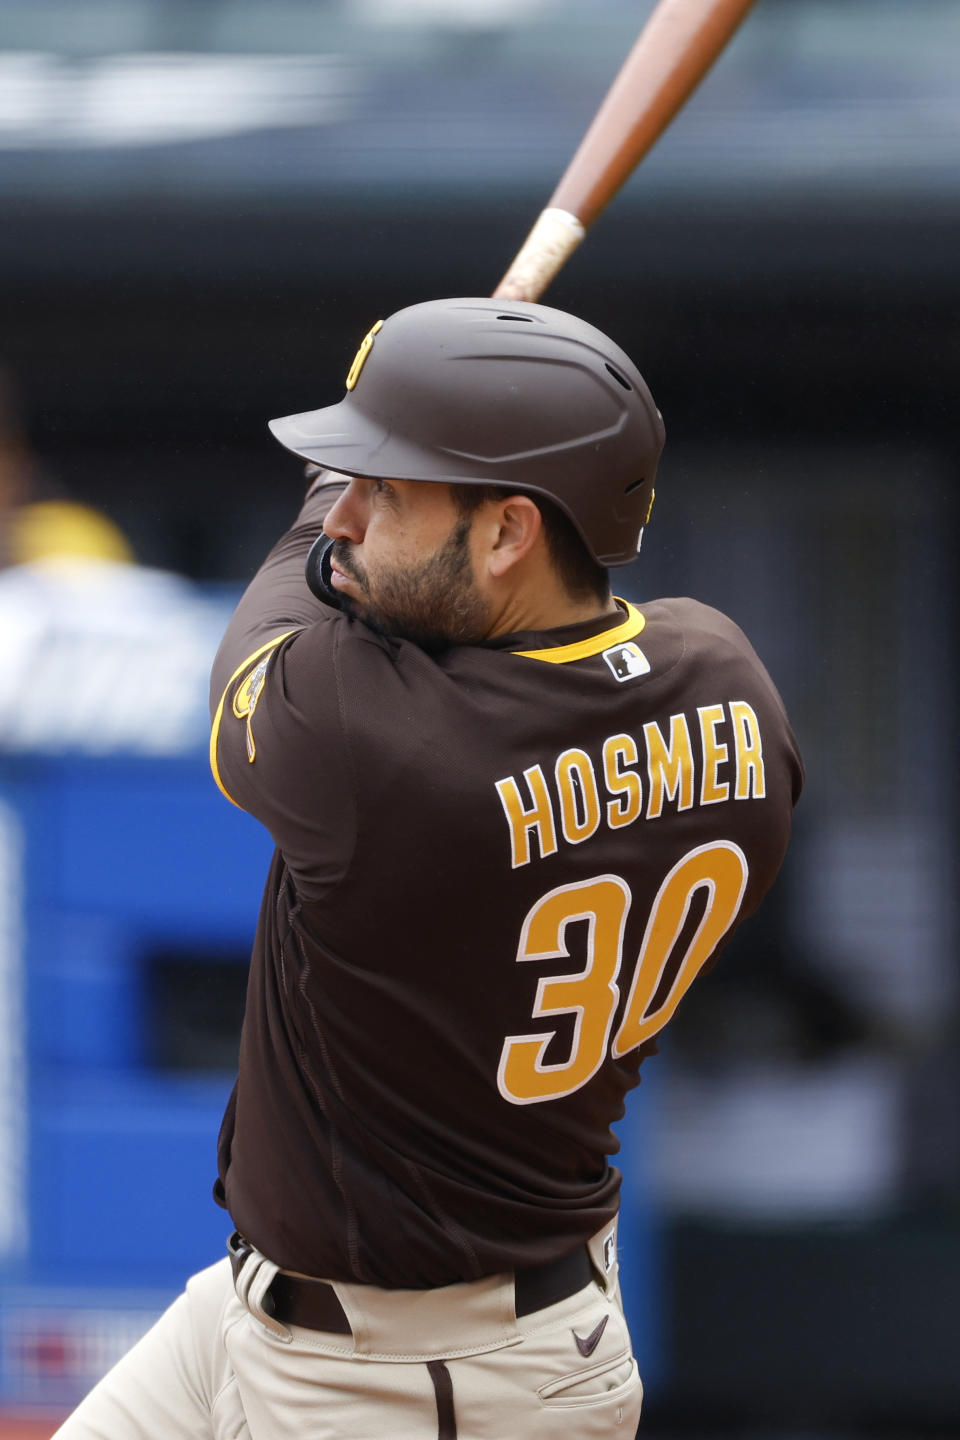 San Diego Padres' Eric Hosmer hits an RBI single against the Cleveland Guardians during the first inning in the first baseball game of a doubleheader, Wednesday, May 4, 2022, in Cleveland. (AP Photo/Ron Schwane)